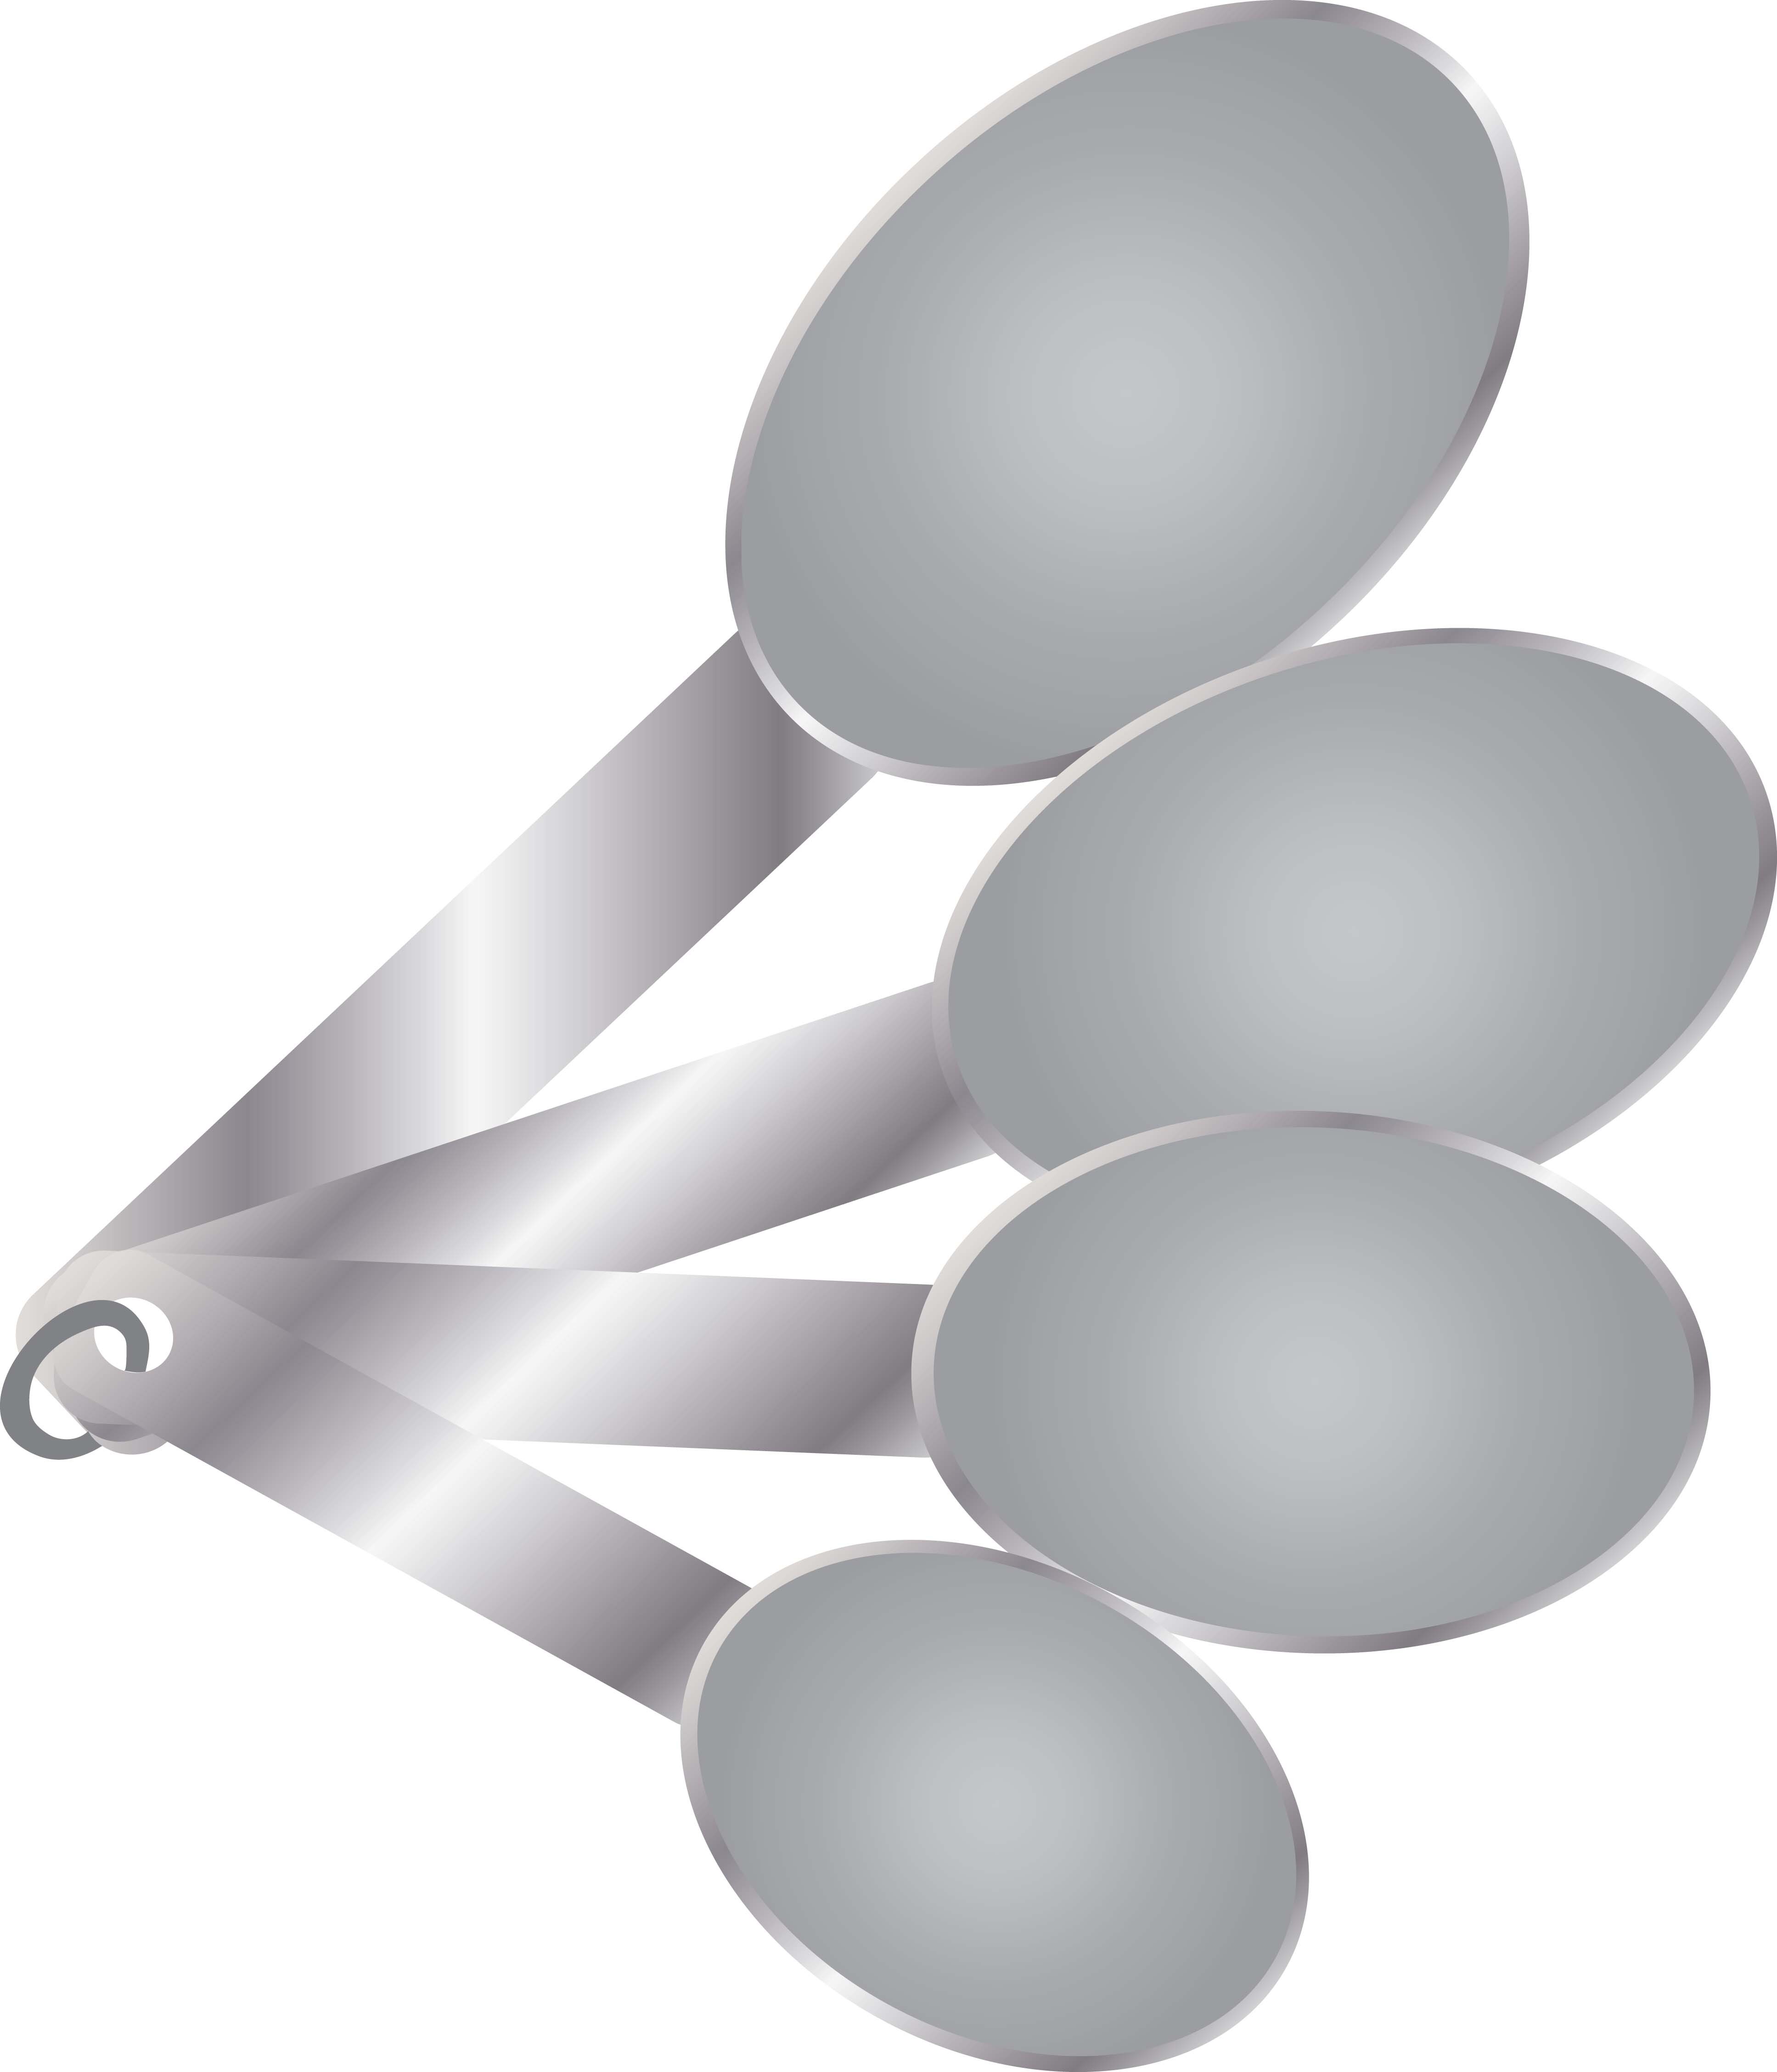 An image of five measuring spoons.